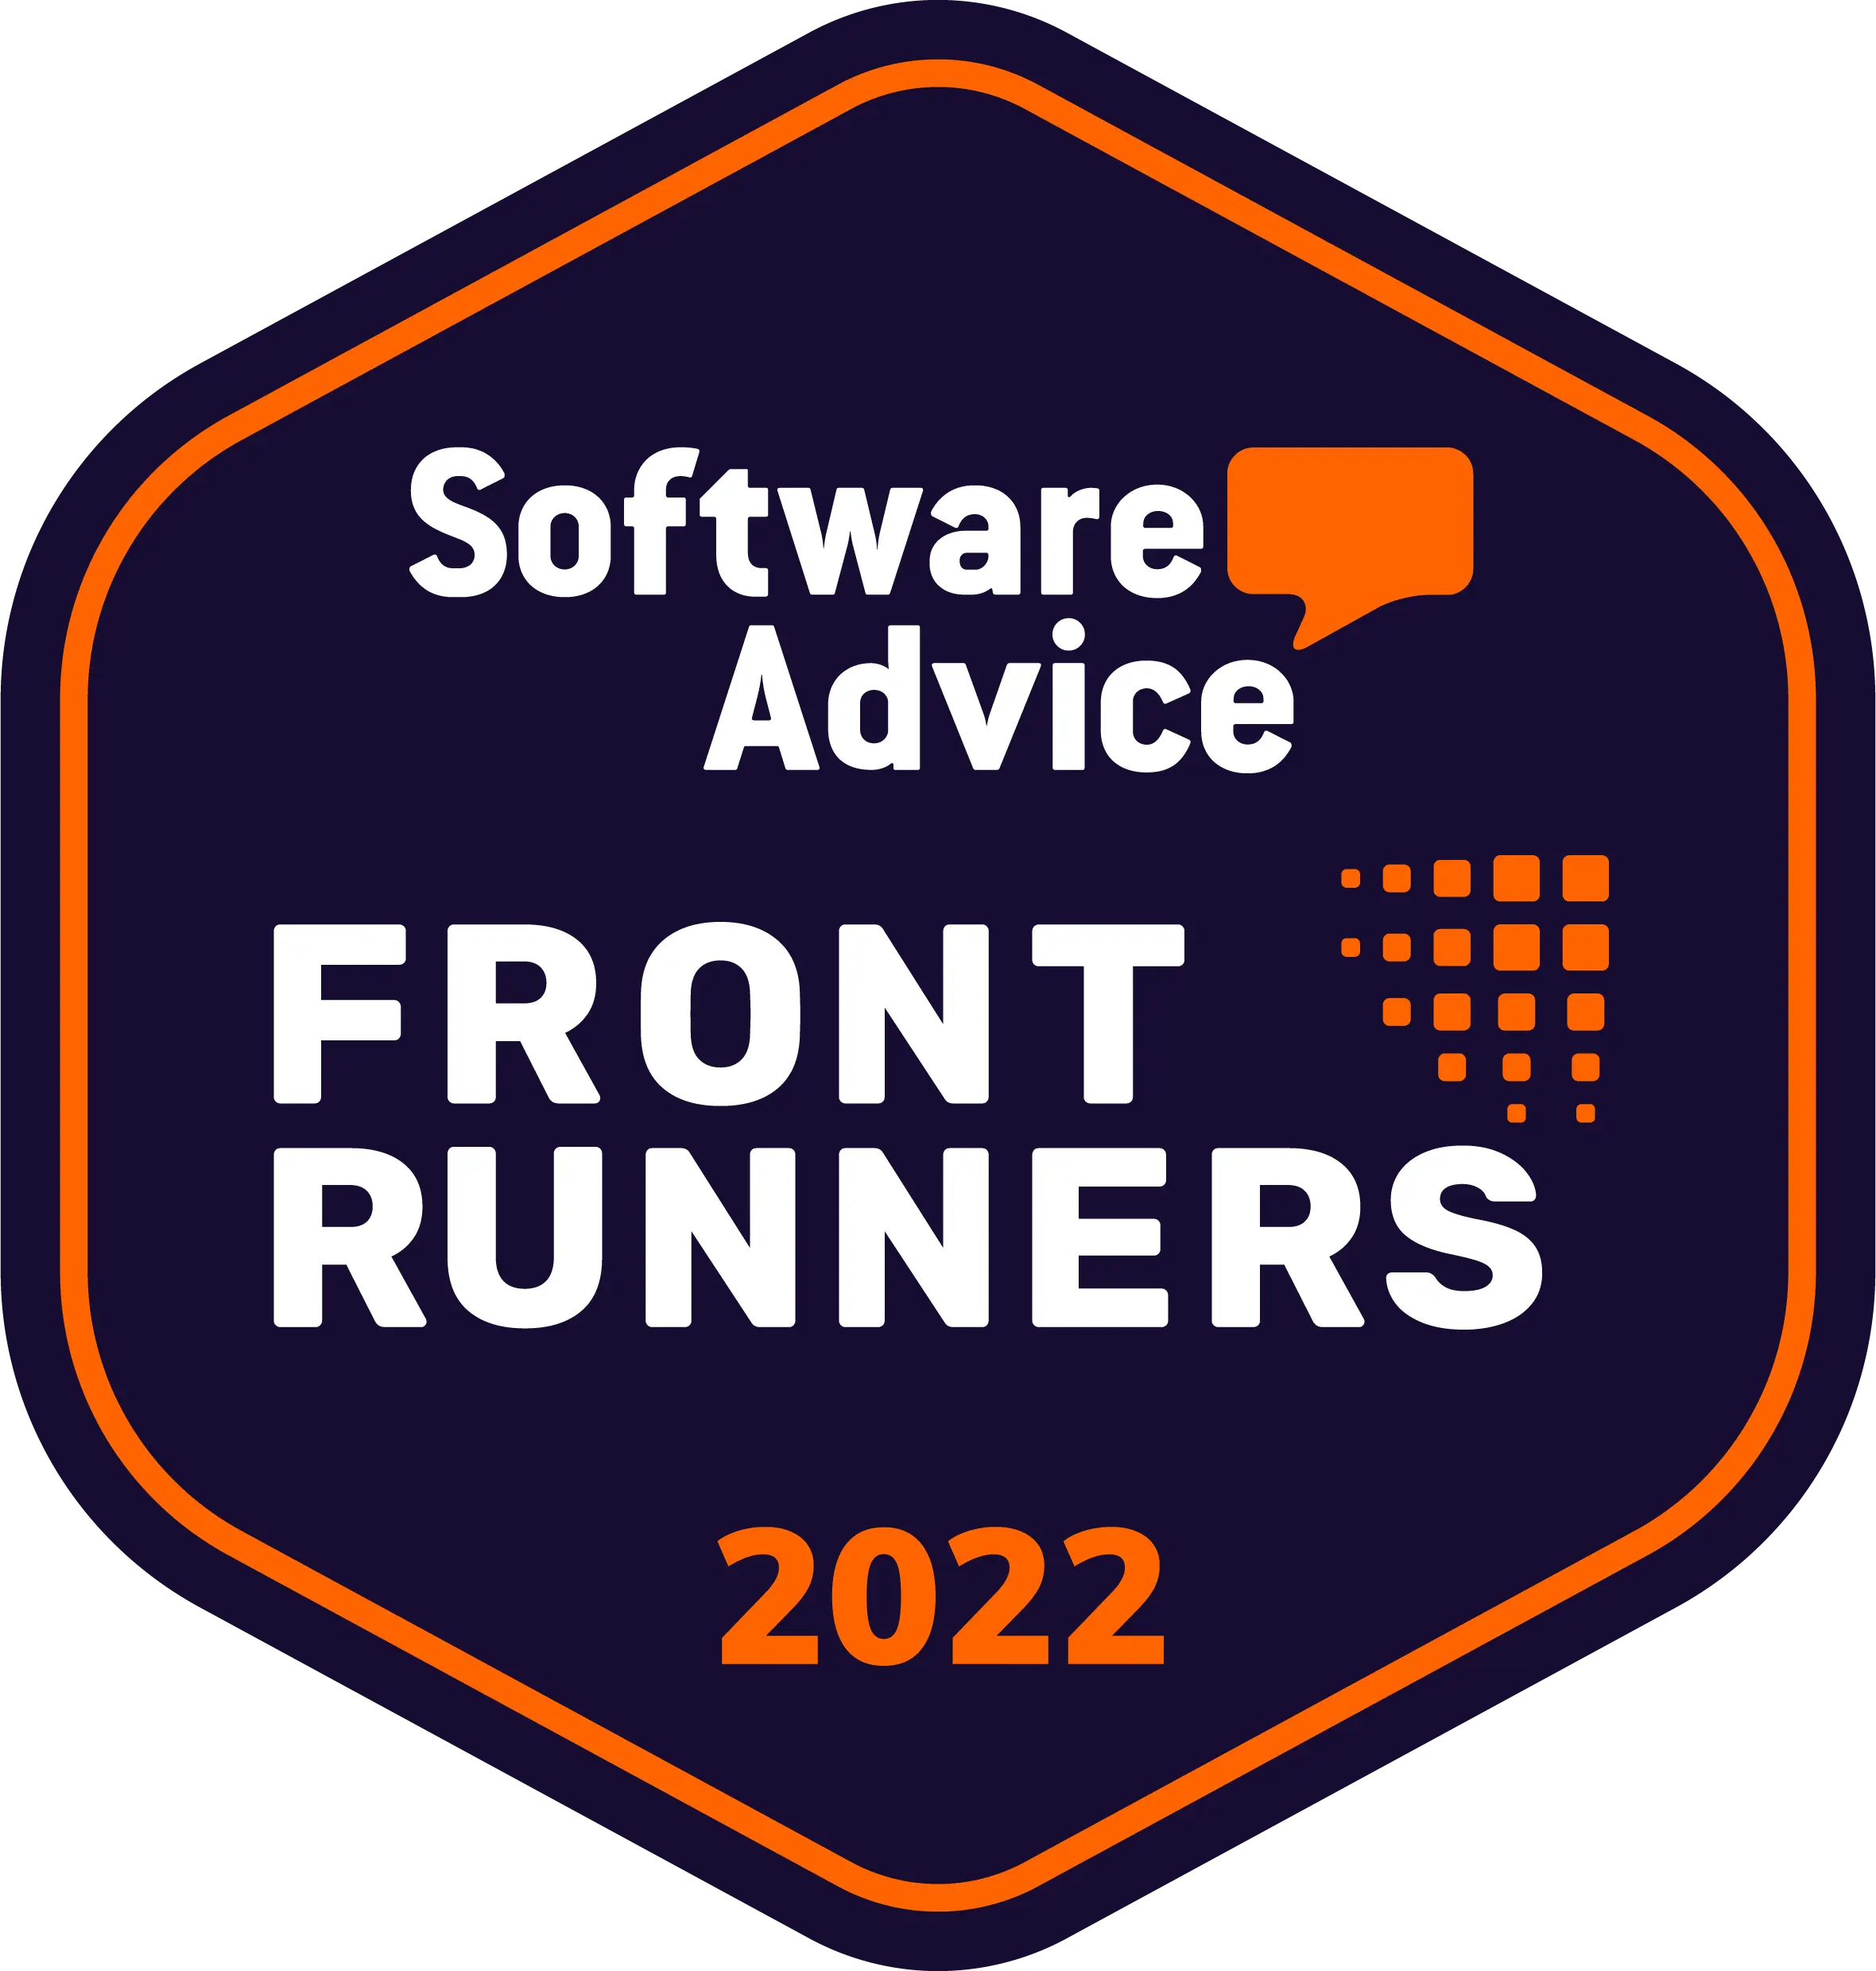 Software Advice - Front Runners - 2022.WebP